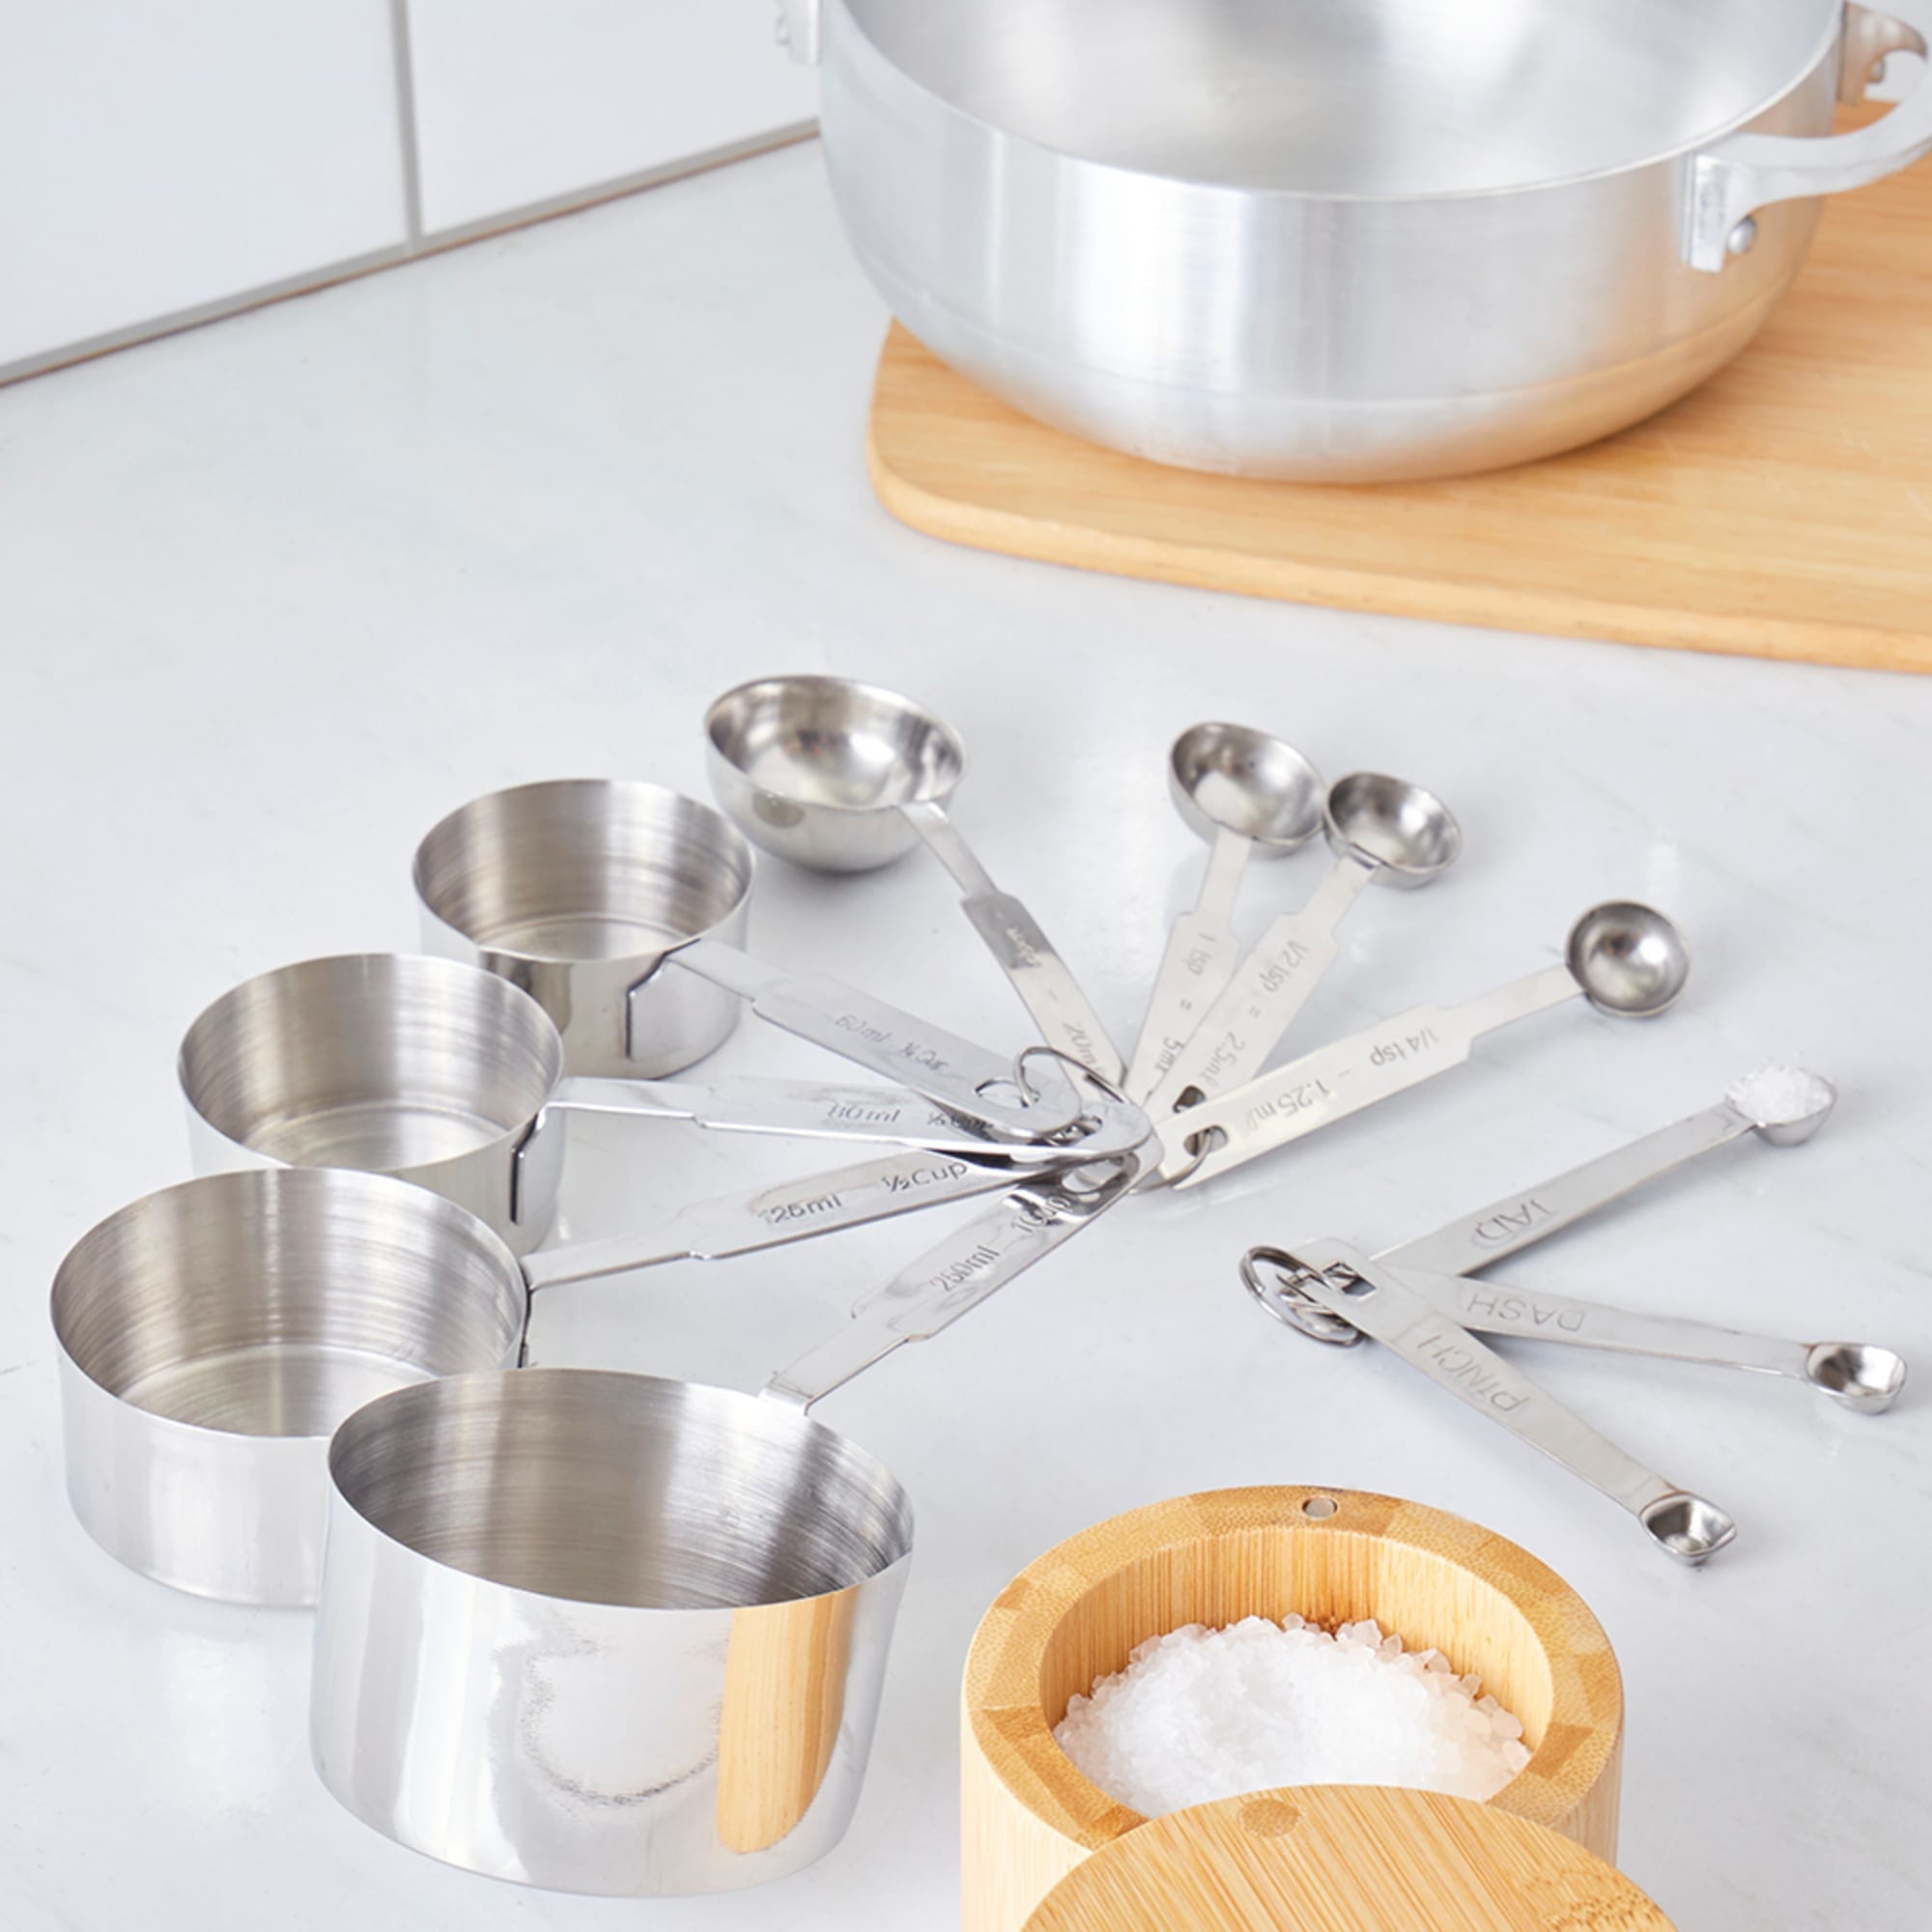 Home Basics 11 Piece Stainless Steel Measuring Cups and Spoons Set $8.00 EACH, CASE PACK OF 24